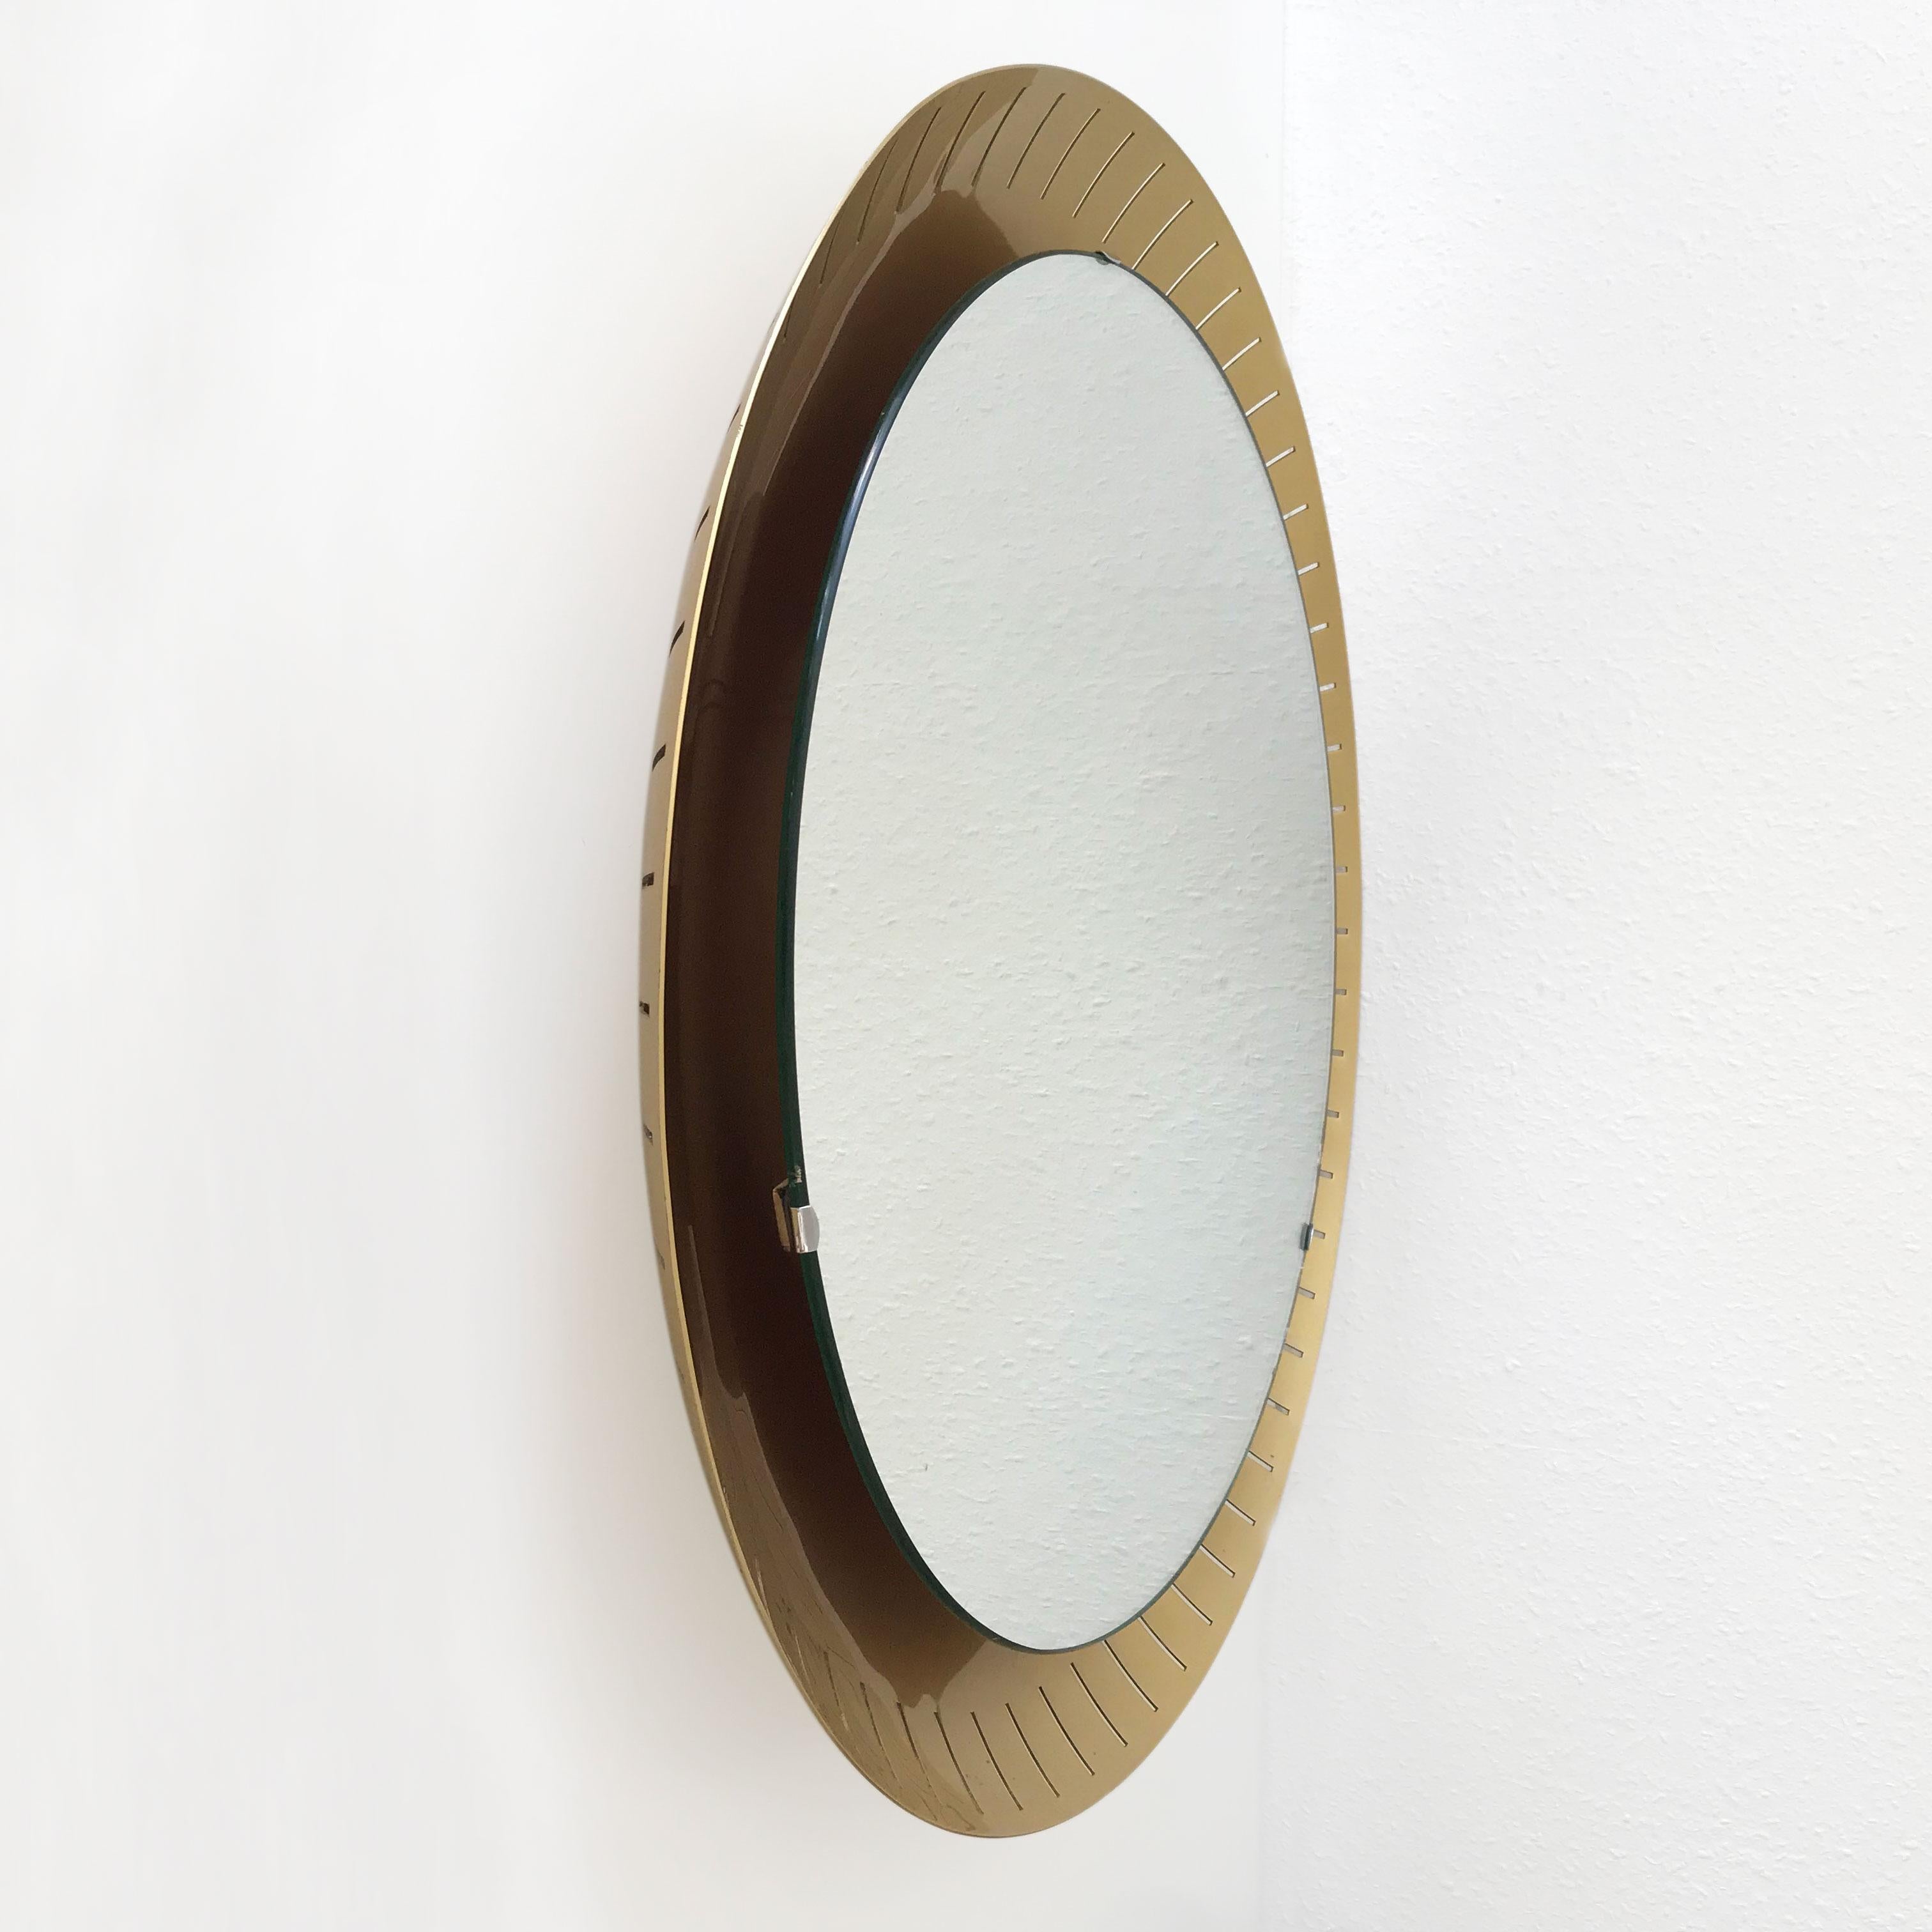 Anodized Large Mid-Century Modern Backlit Wall Mirror by Hillebrand, 1950s, Germany For Sale